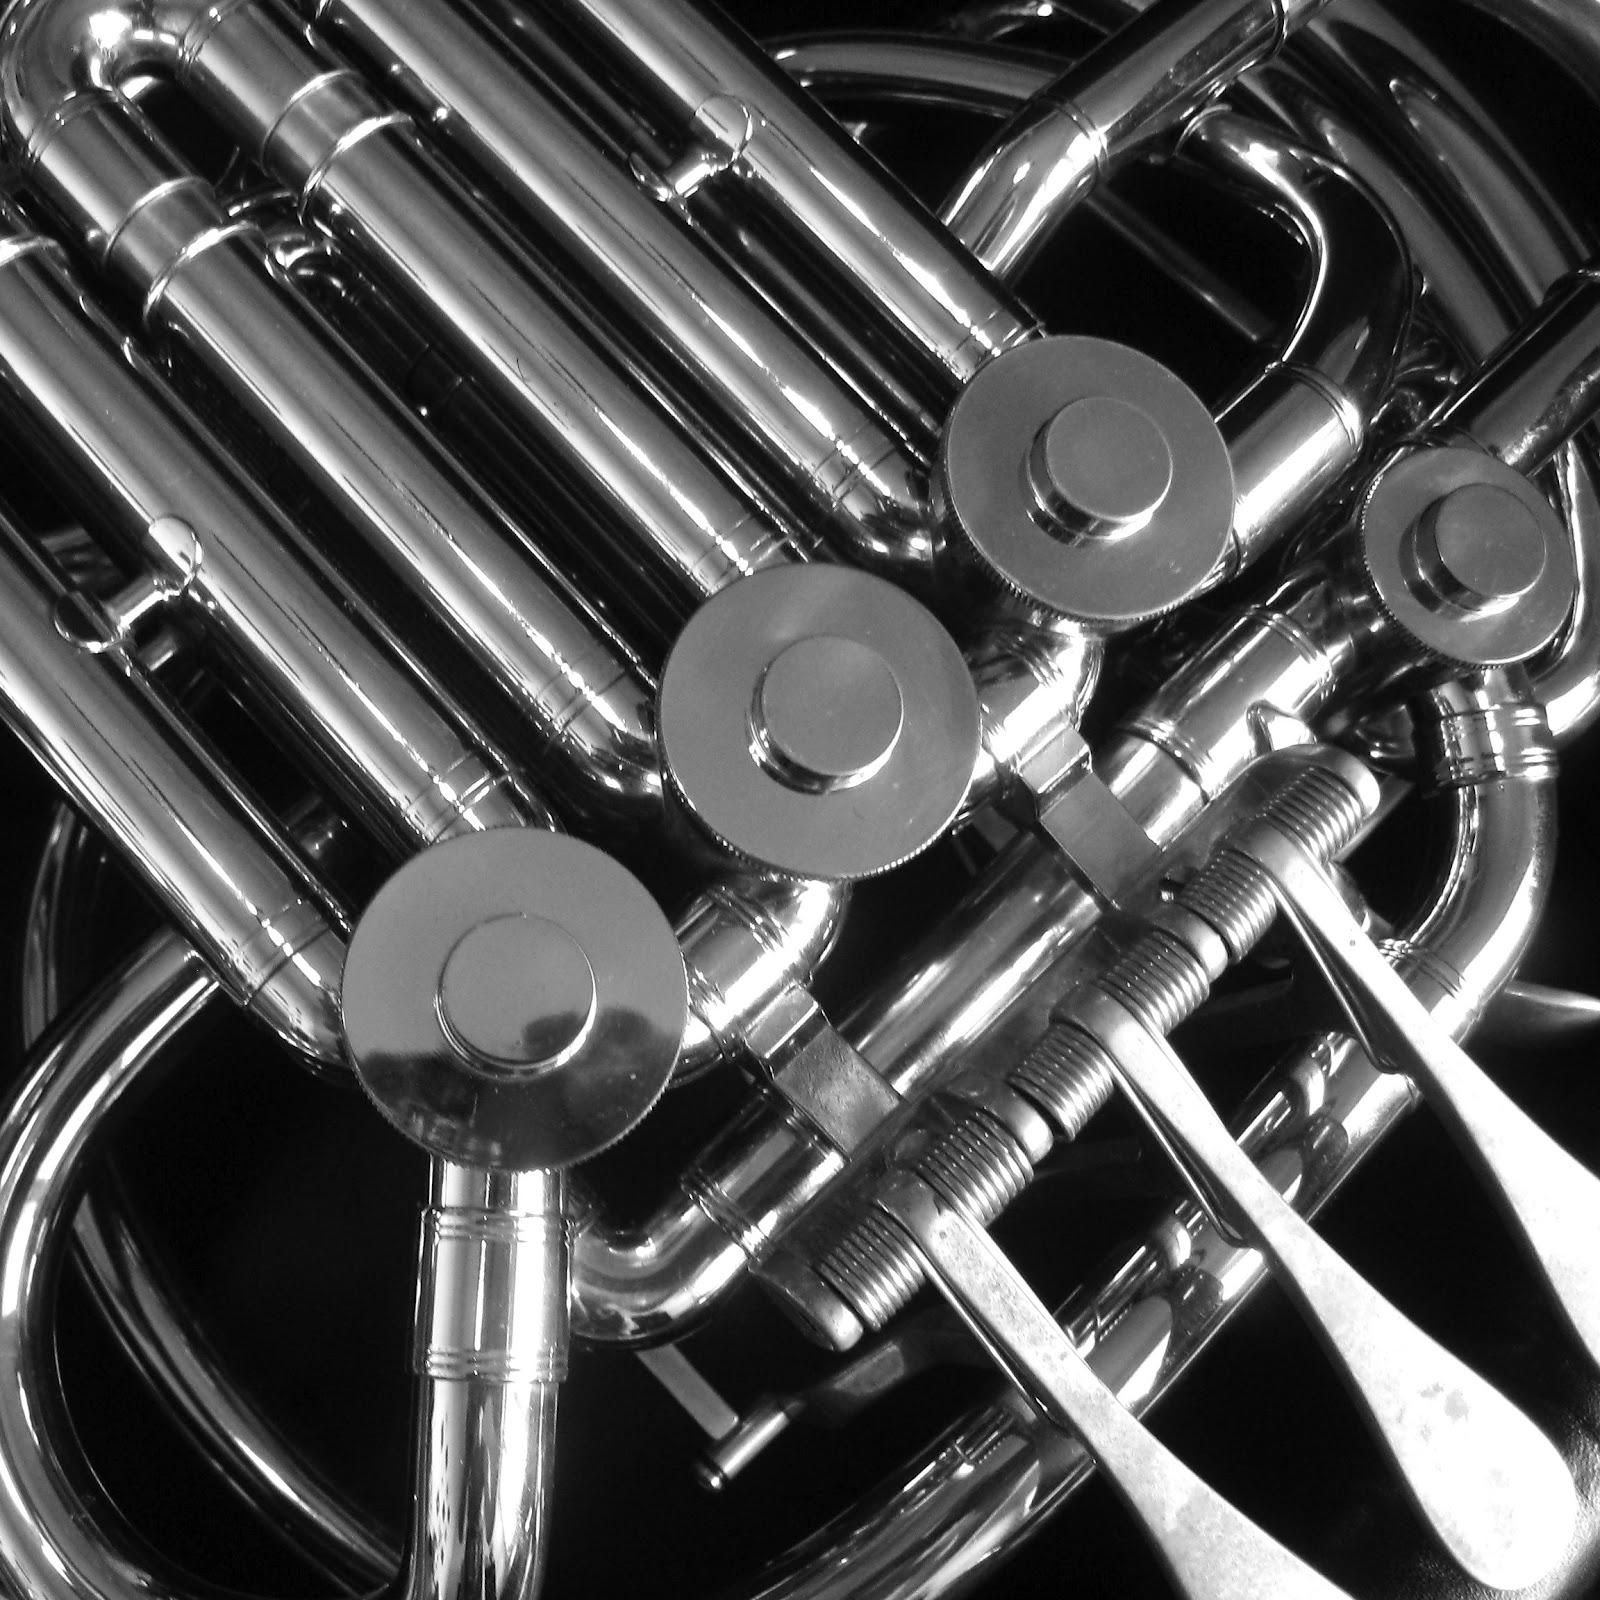 Spirals & Spatulas: Clarinet Photo, French Horn Photo, and Piano